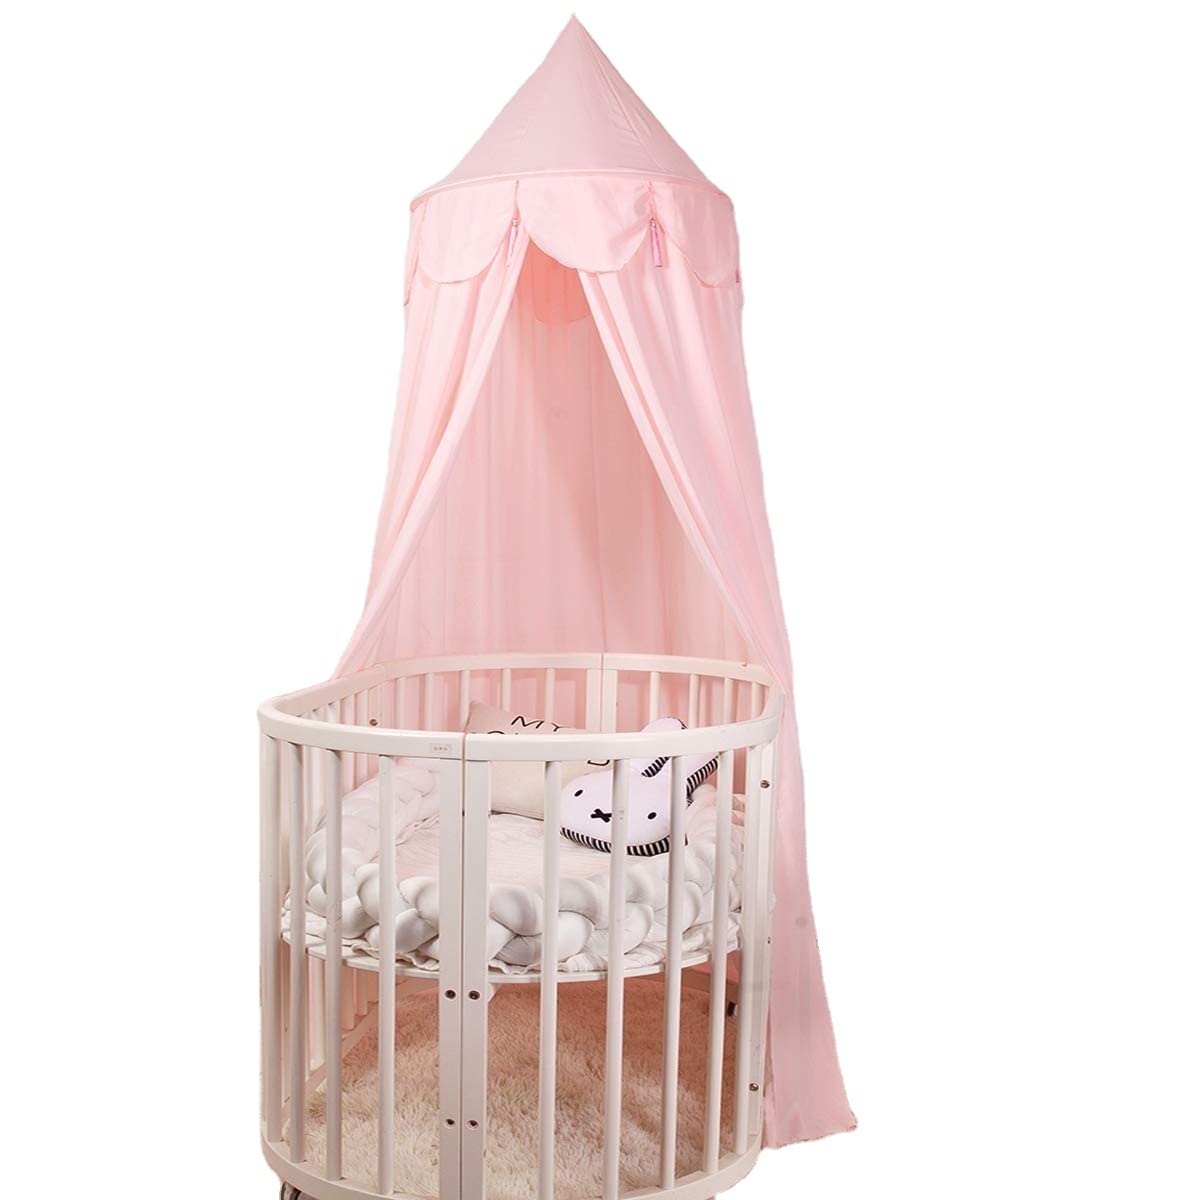 Soft Baby Crib Cover Bed Canopy Children Play Tent Reading Corner Mosquito Net Camping Full Travel Outdoor Folded Circular LLIN